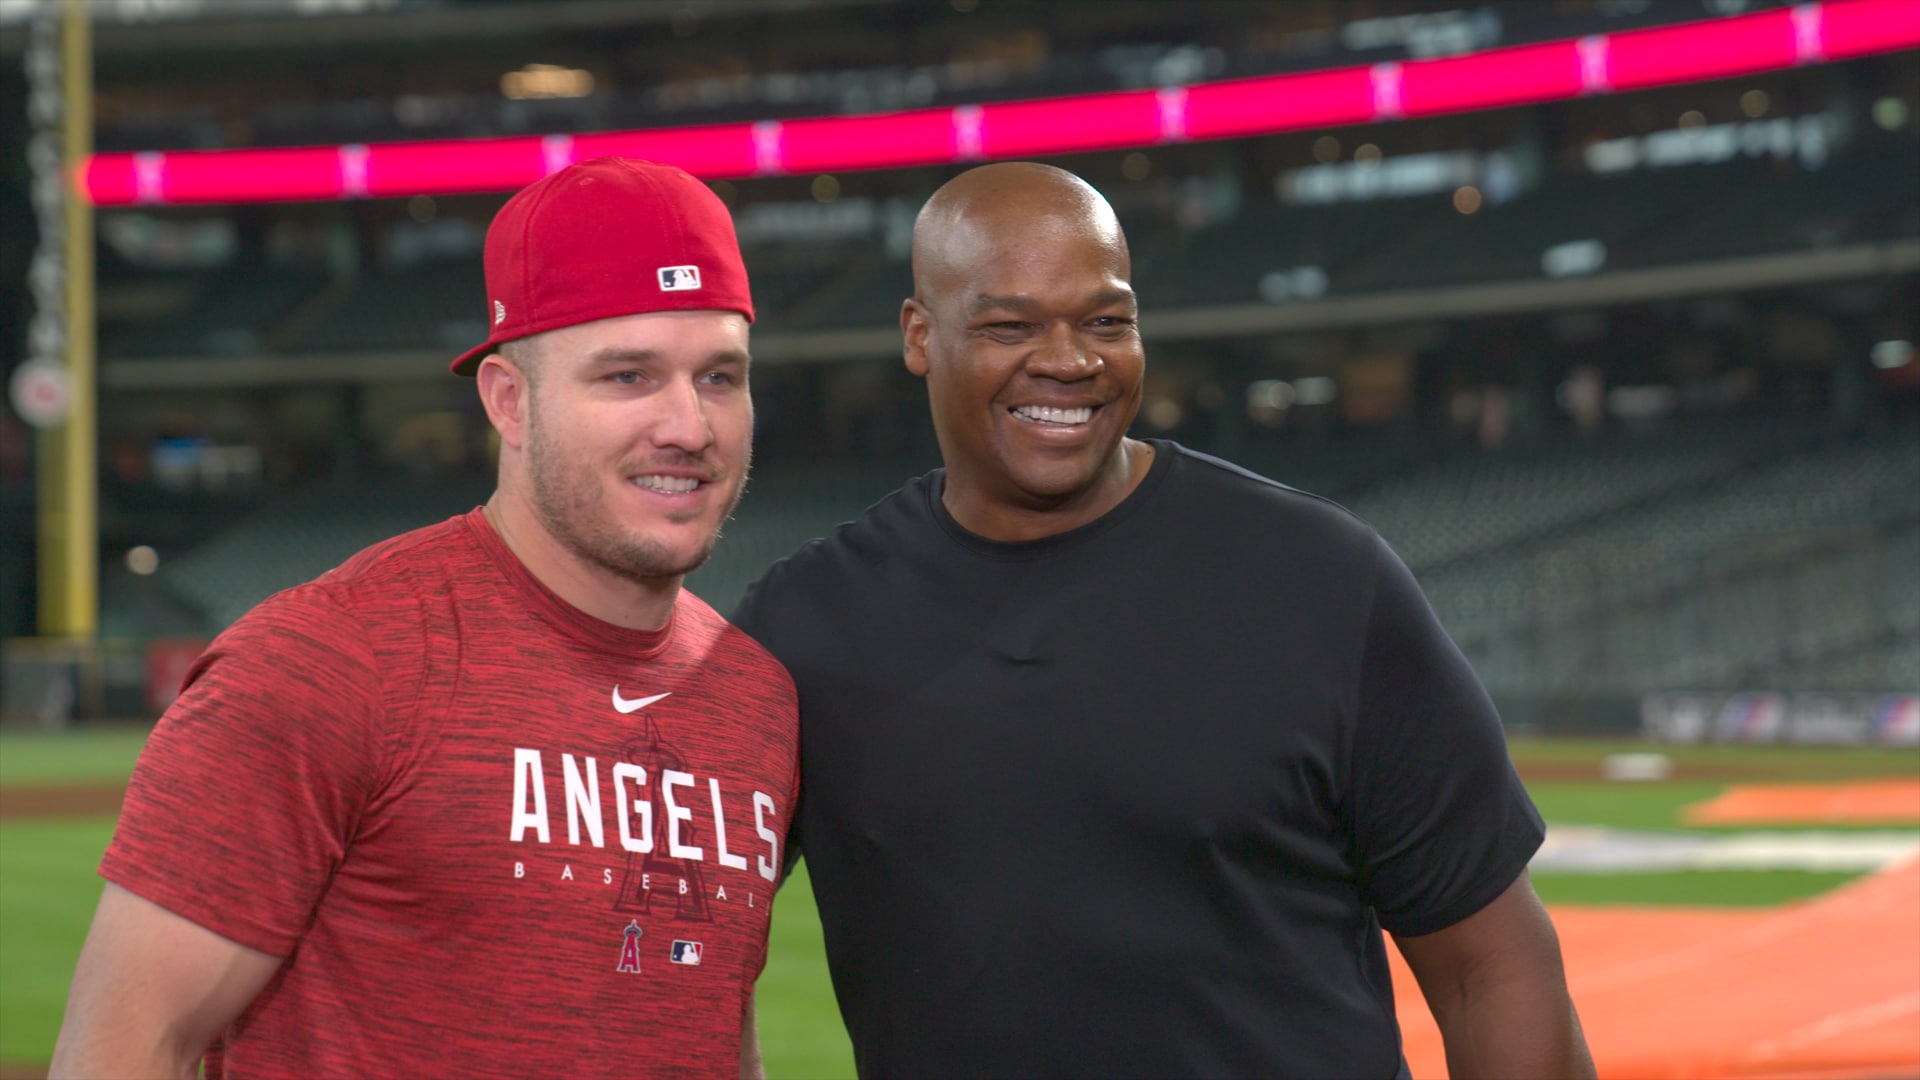 Frank Thomas's Apple debut includes an interview with Mike Trout this Friday.